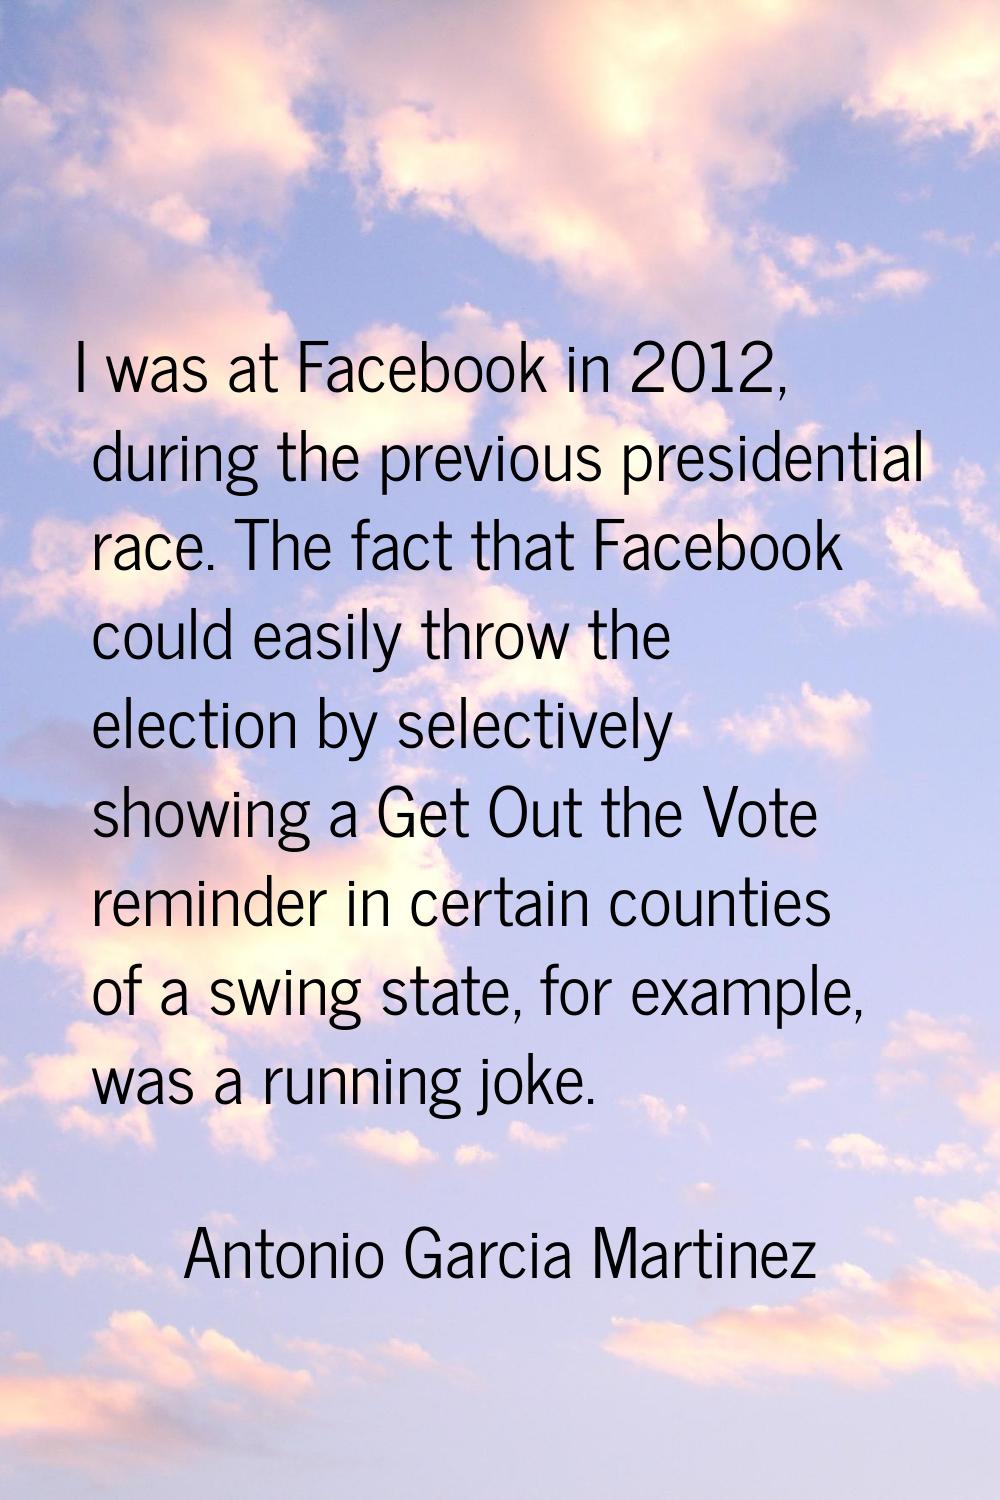 I was at Facebook in 2012, during the previous presidential race. The fact that Facebook could easi